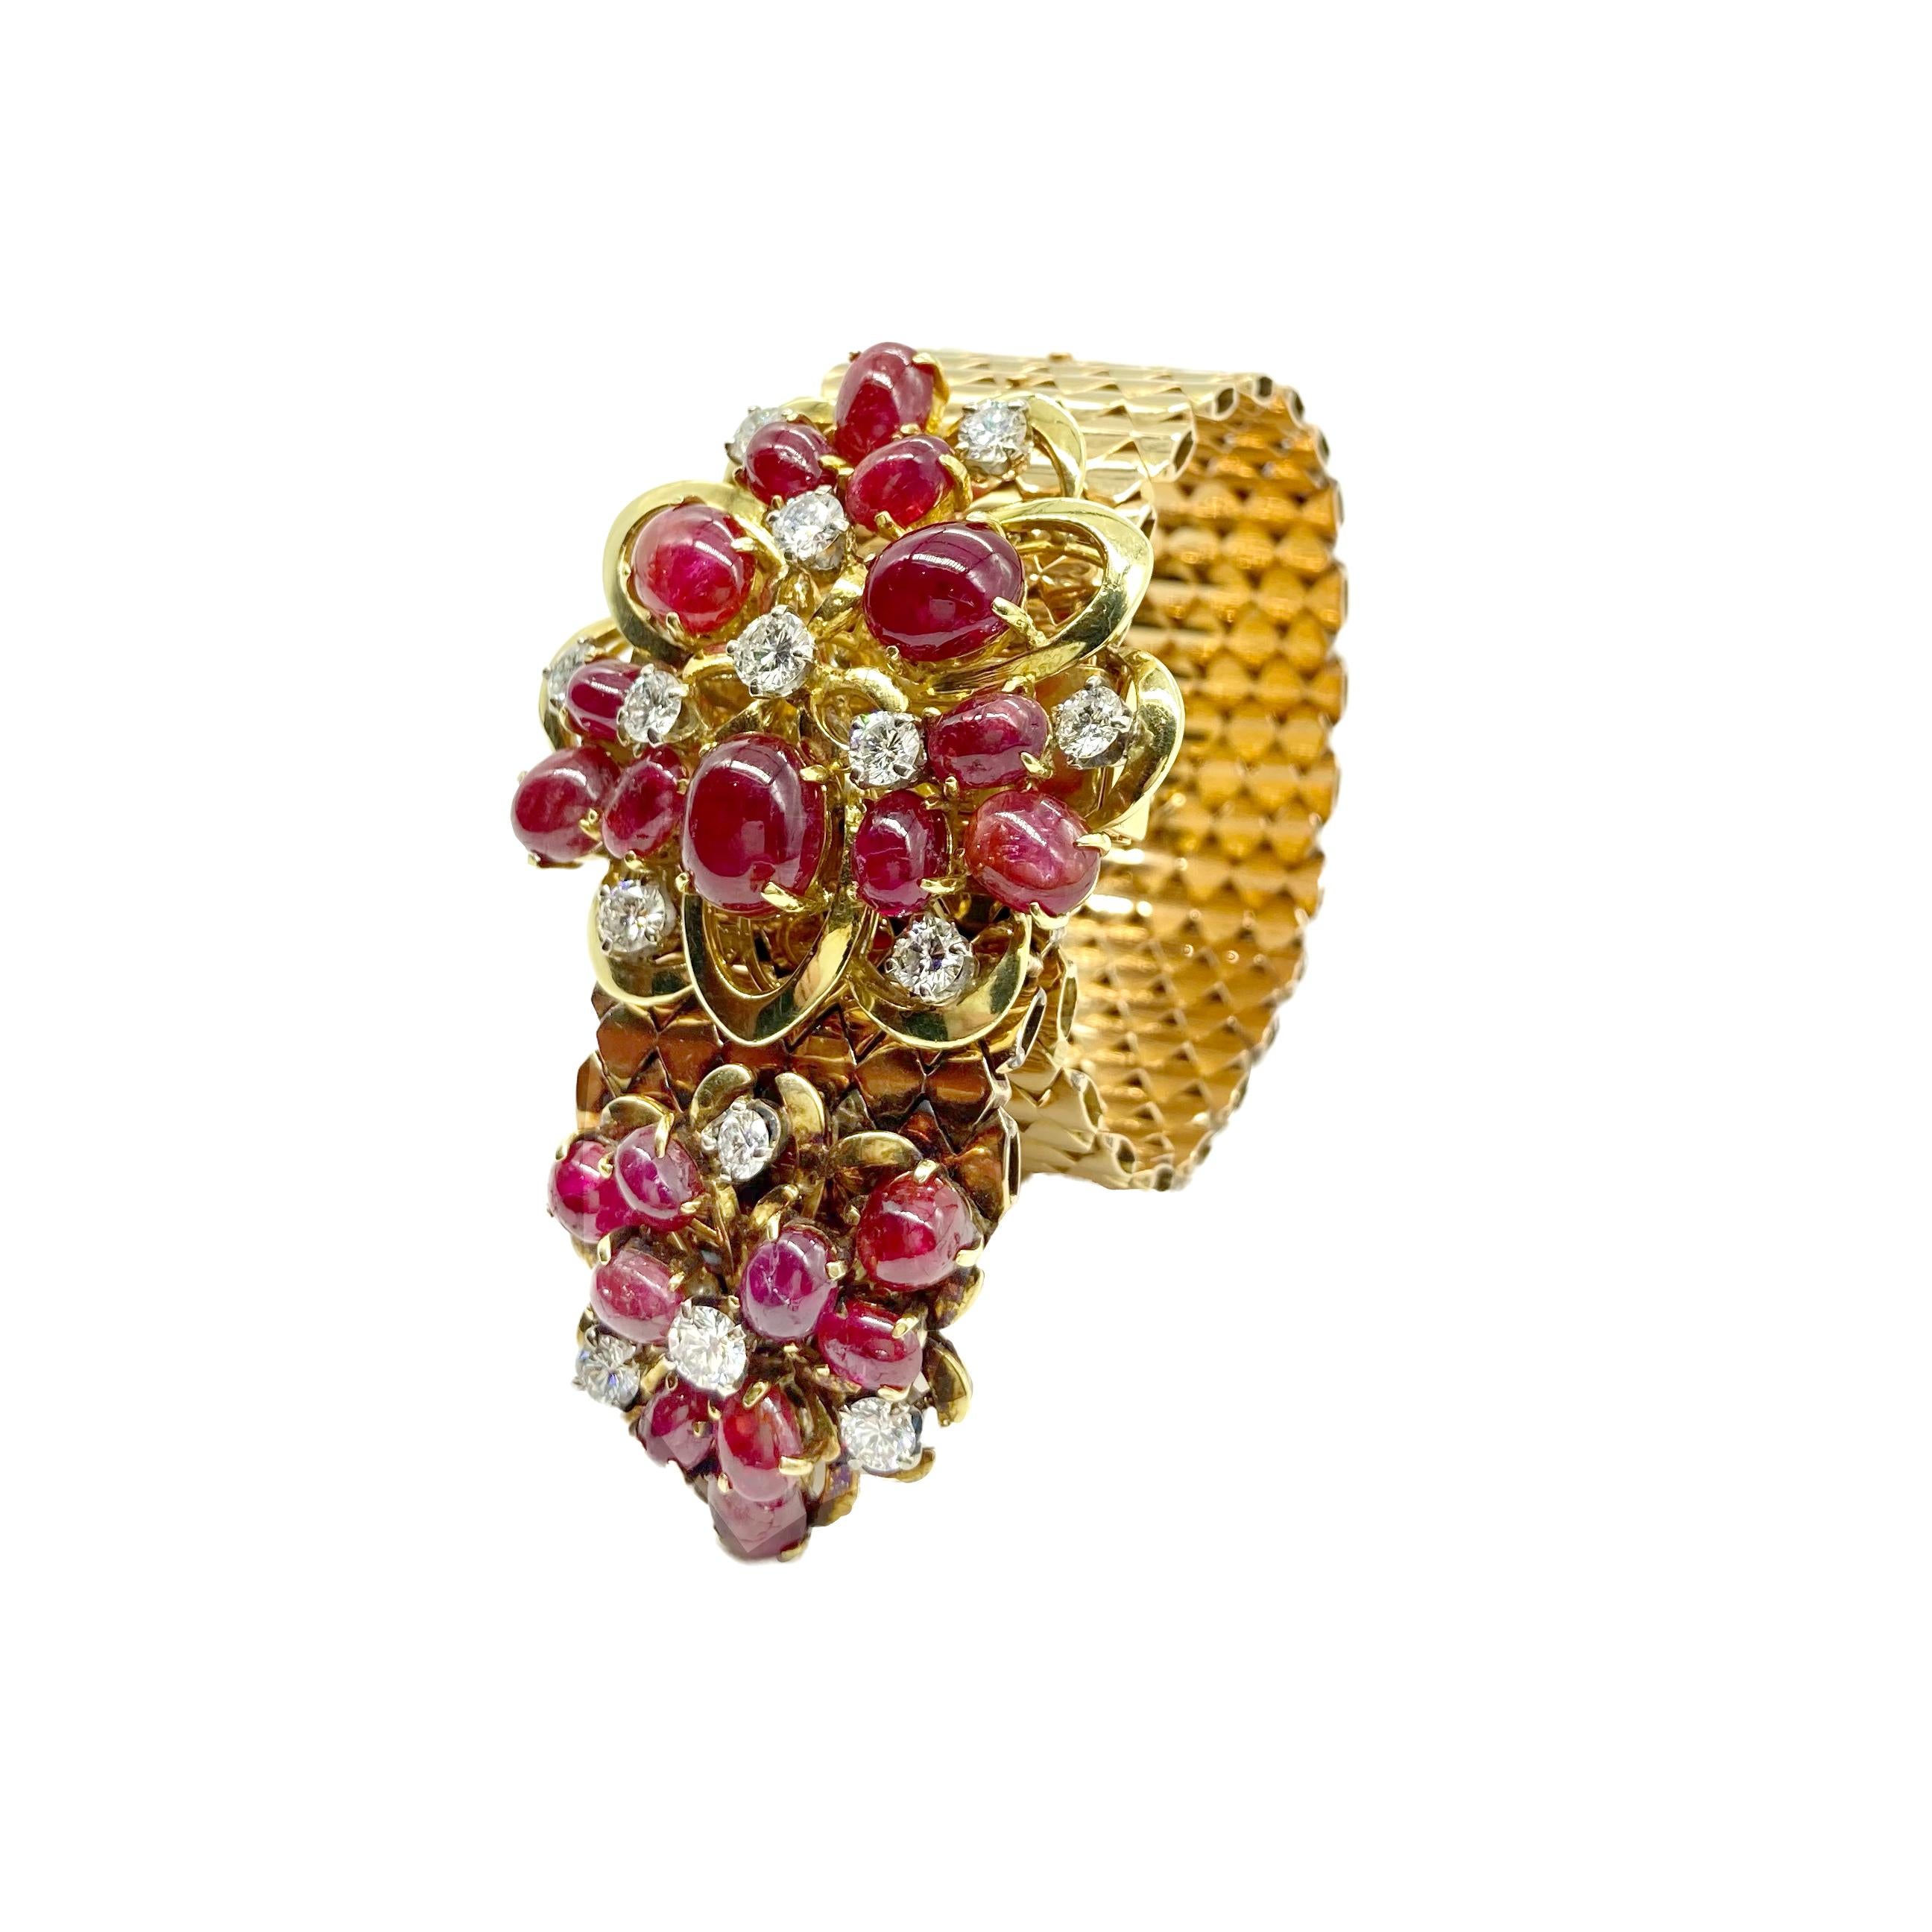 A retro adjustable slide bracelet in 18 karat yellow gold with 14 round diamonds (app. 3.15 cts) and 21 oval cabochon rubies. Made in France, circa 1940.  